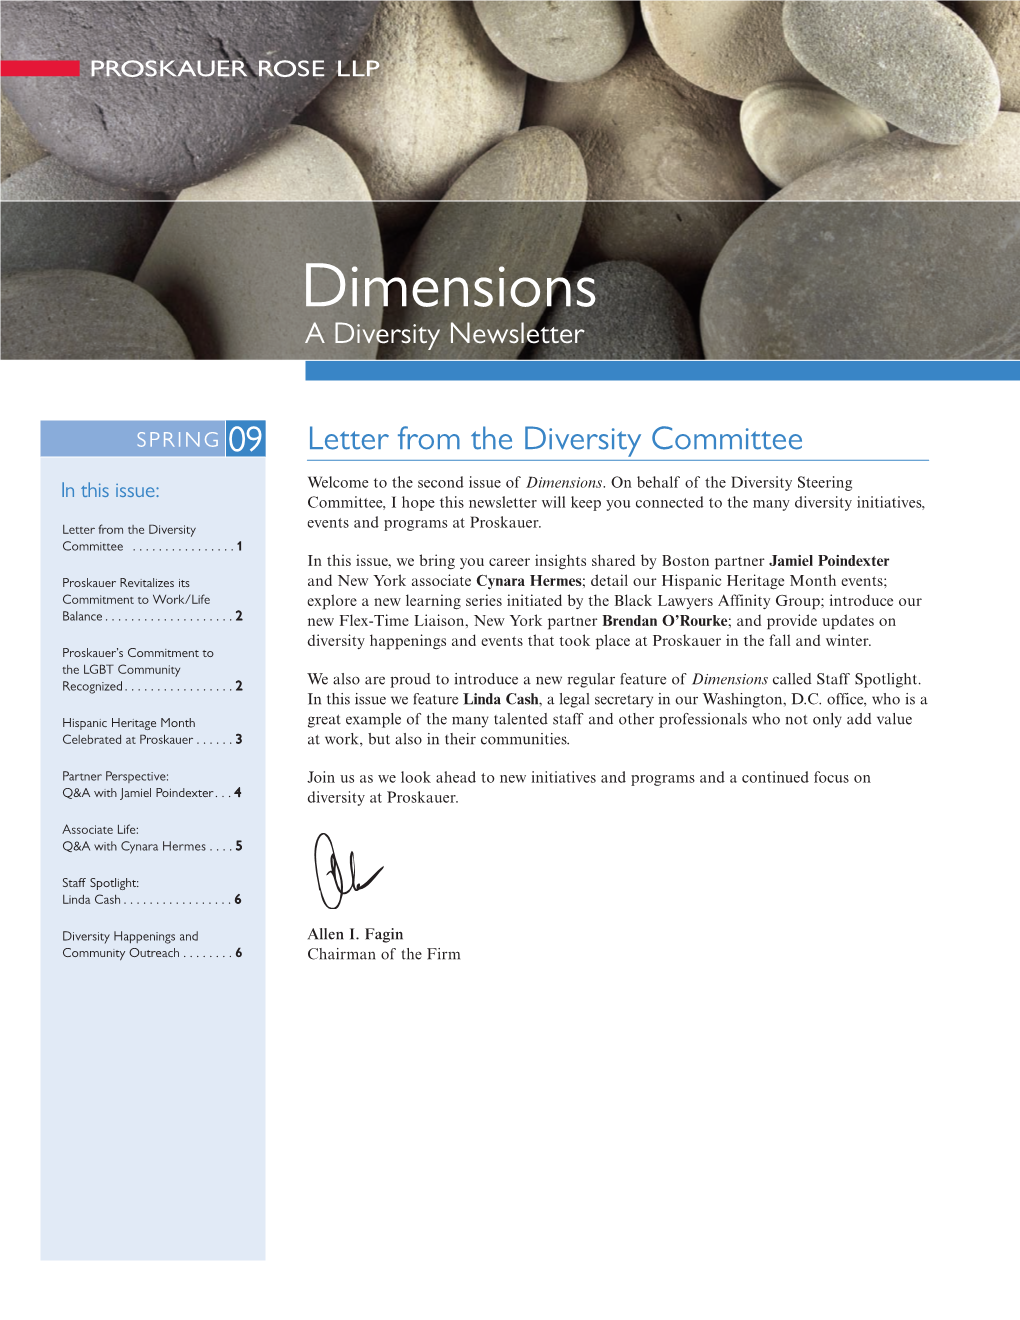 Dimensions a Diversity Newsletter